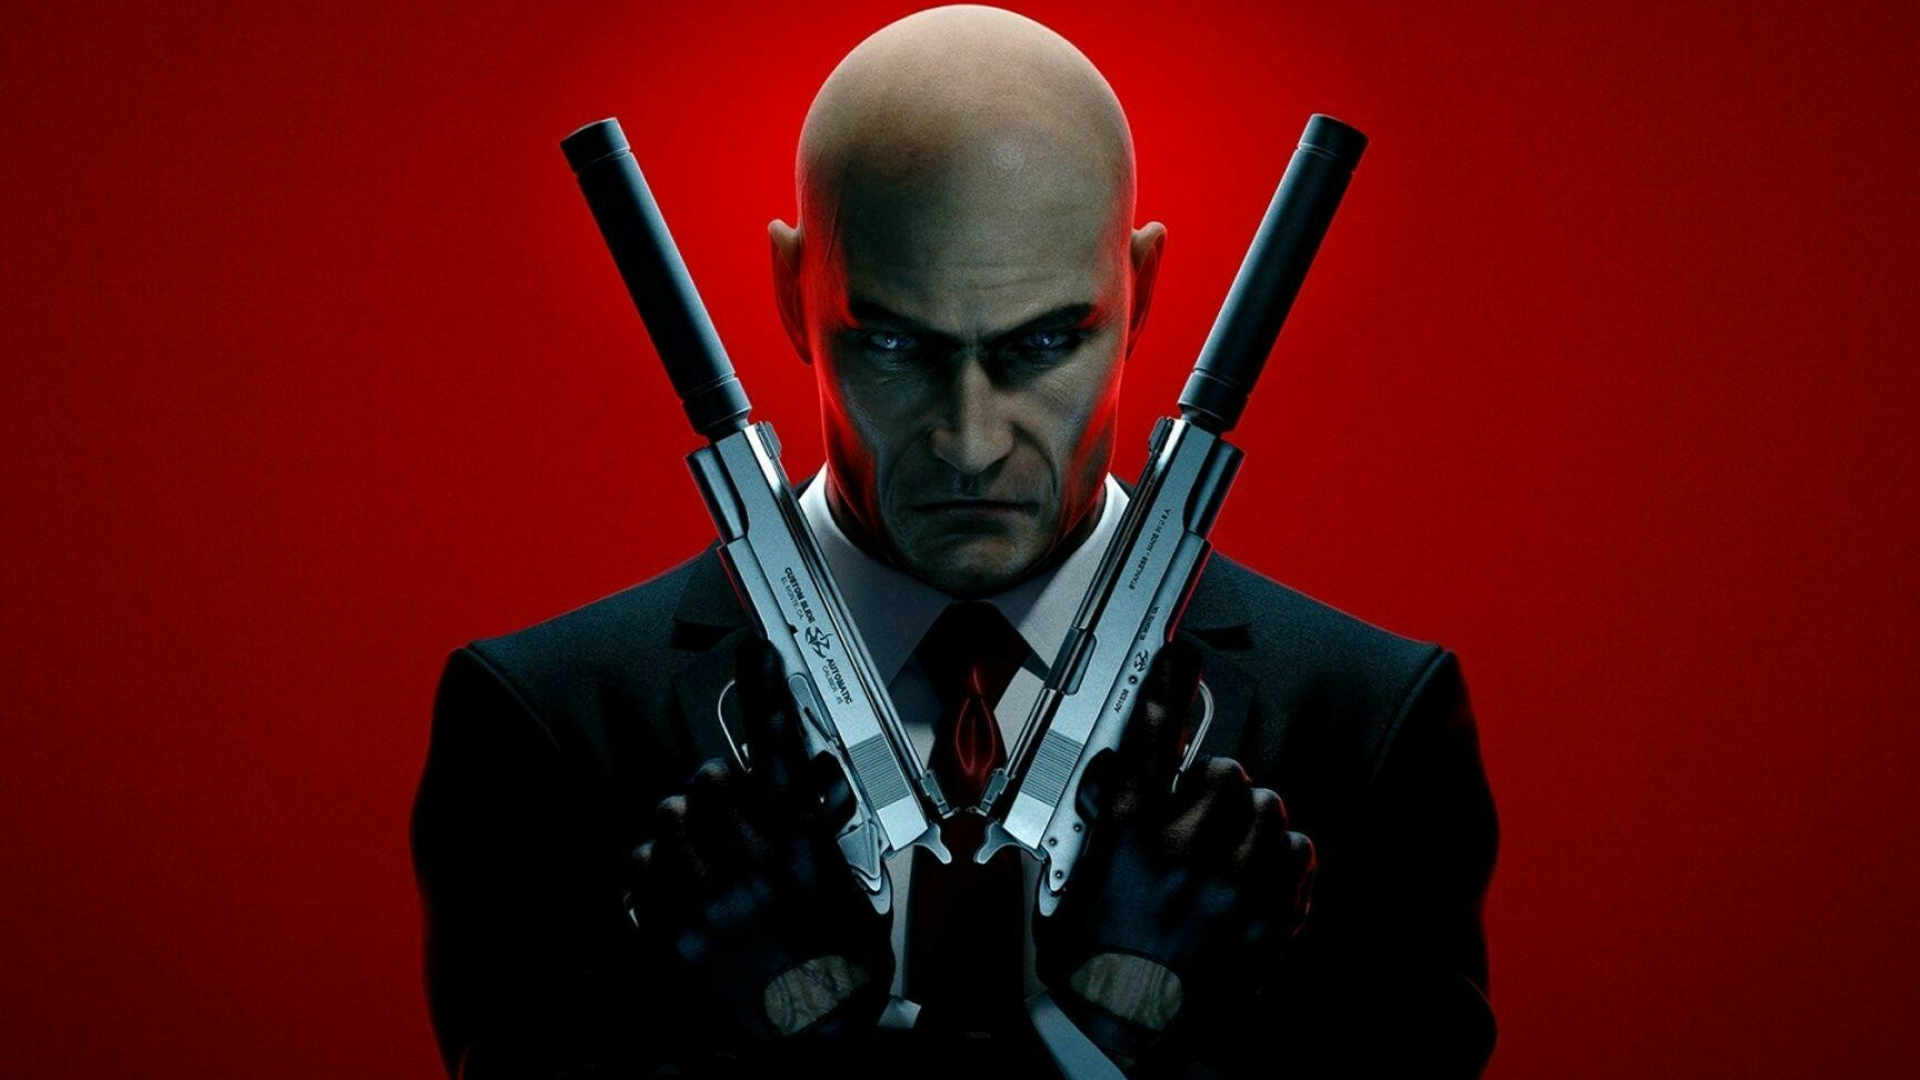 Hitman (Game): The player controls 47, A monotone and seemingly emotionless contract killer. 1920x1080 Full HD Wallpaper.